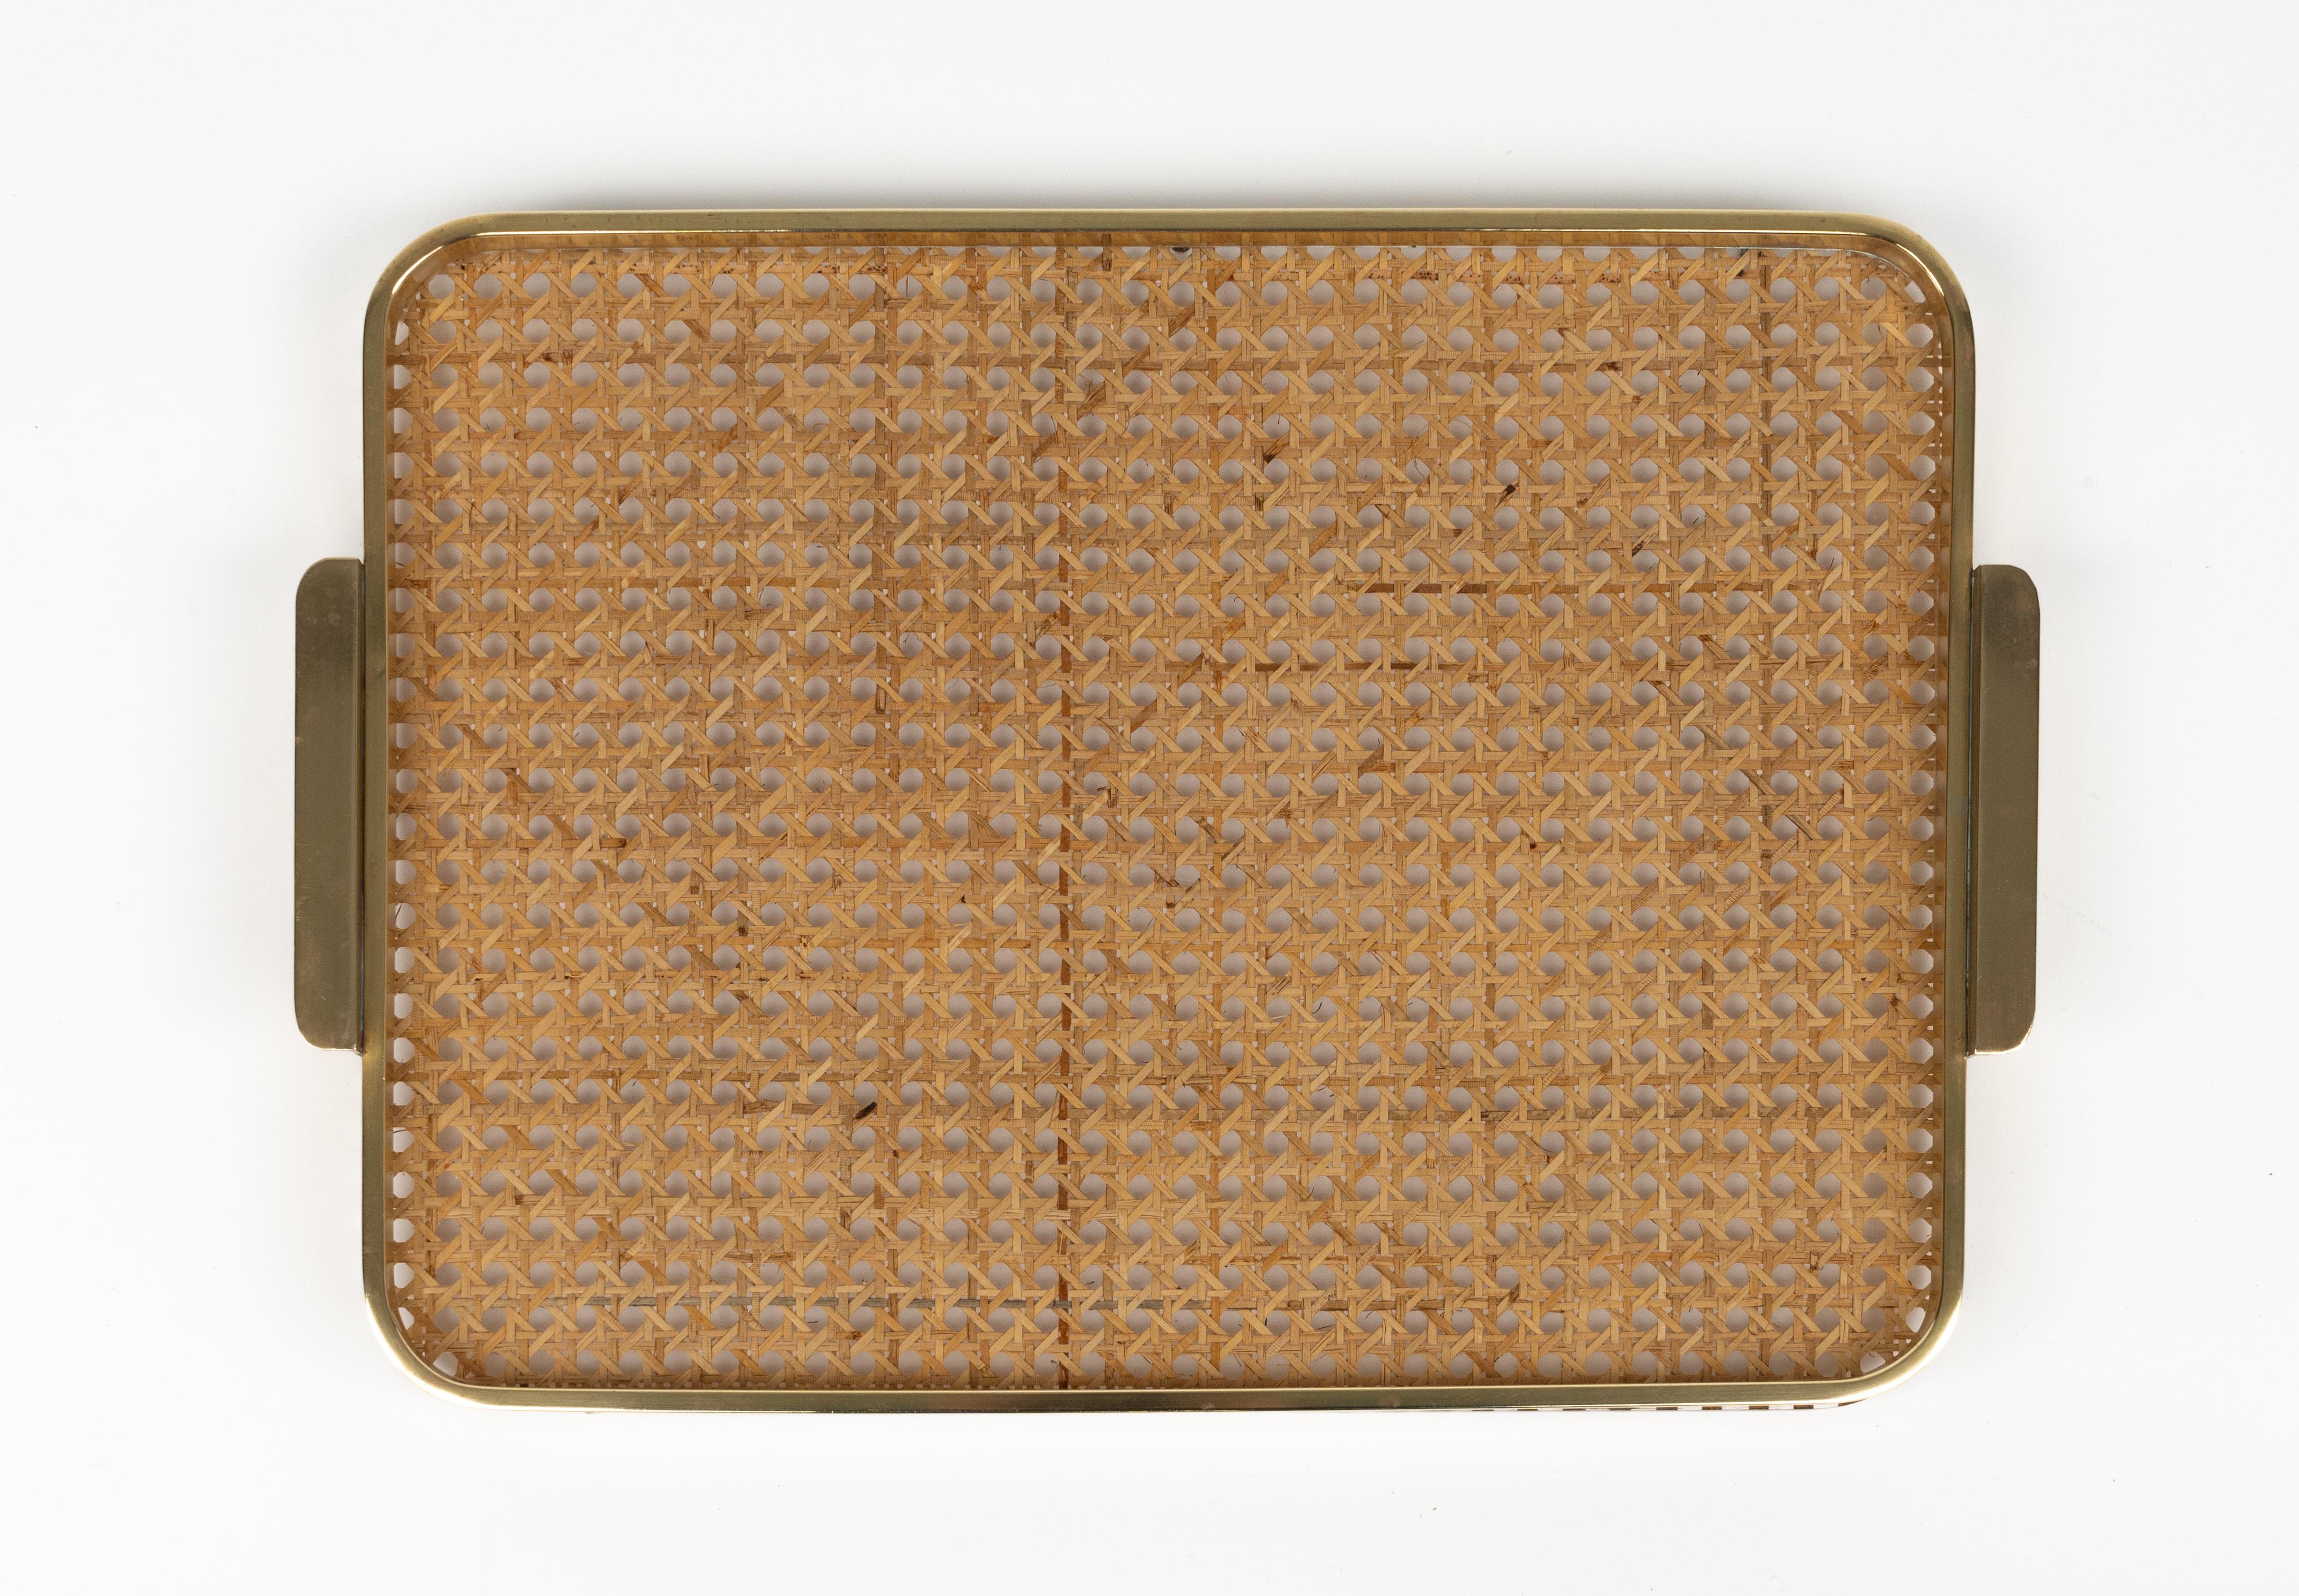 Serving Tray in Lucite, Rattan and Brass Christian Dior Style, Italy, 1970s For Sale 6